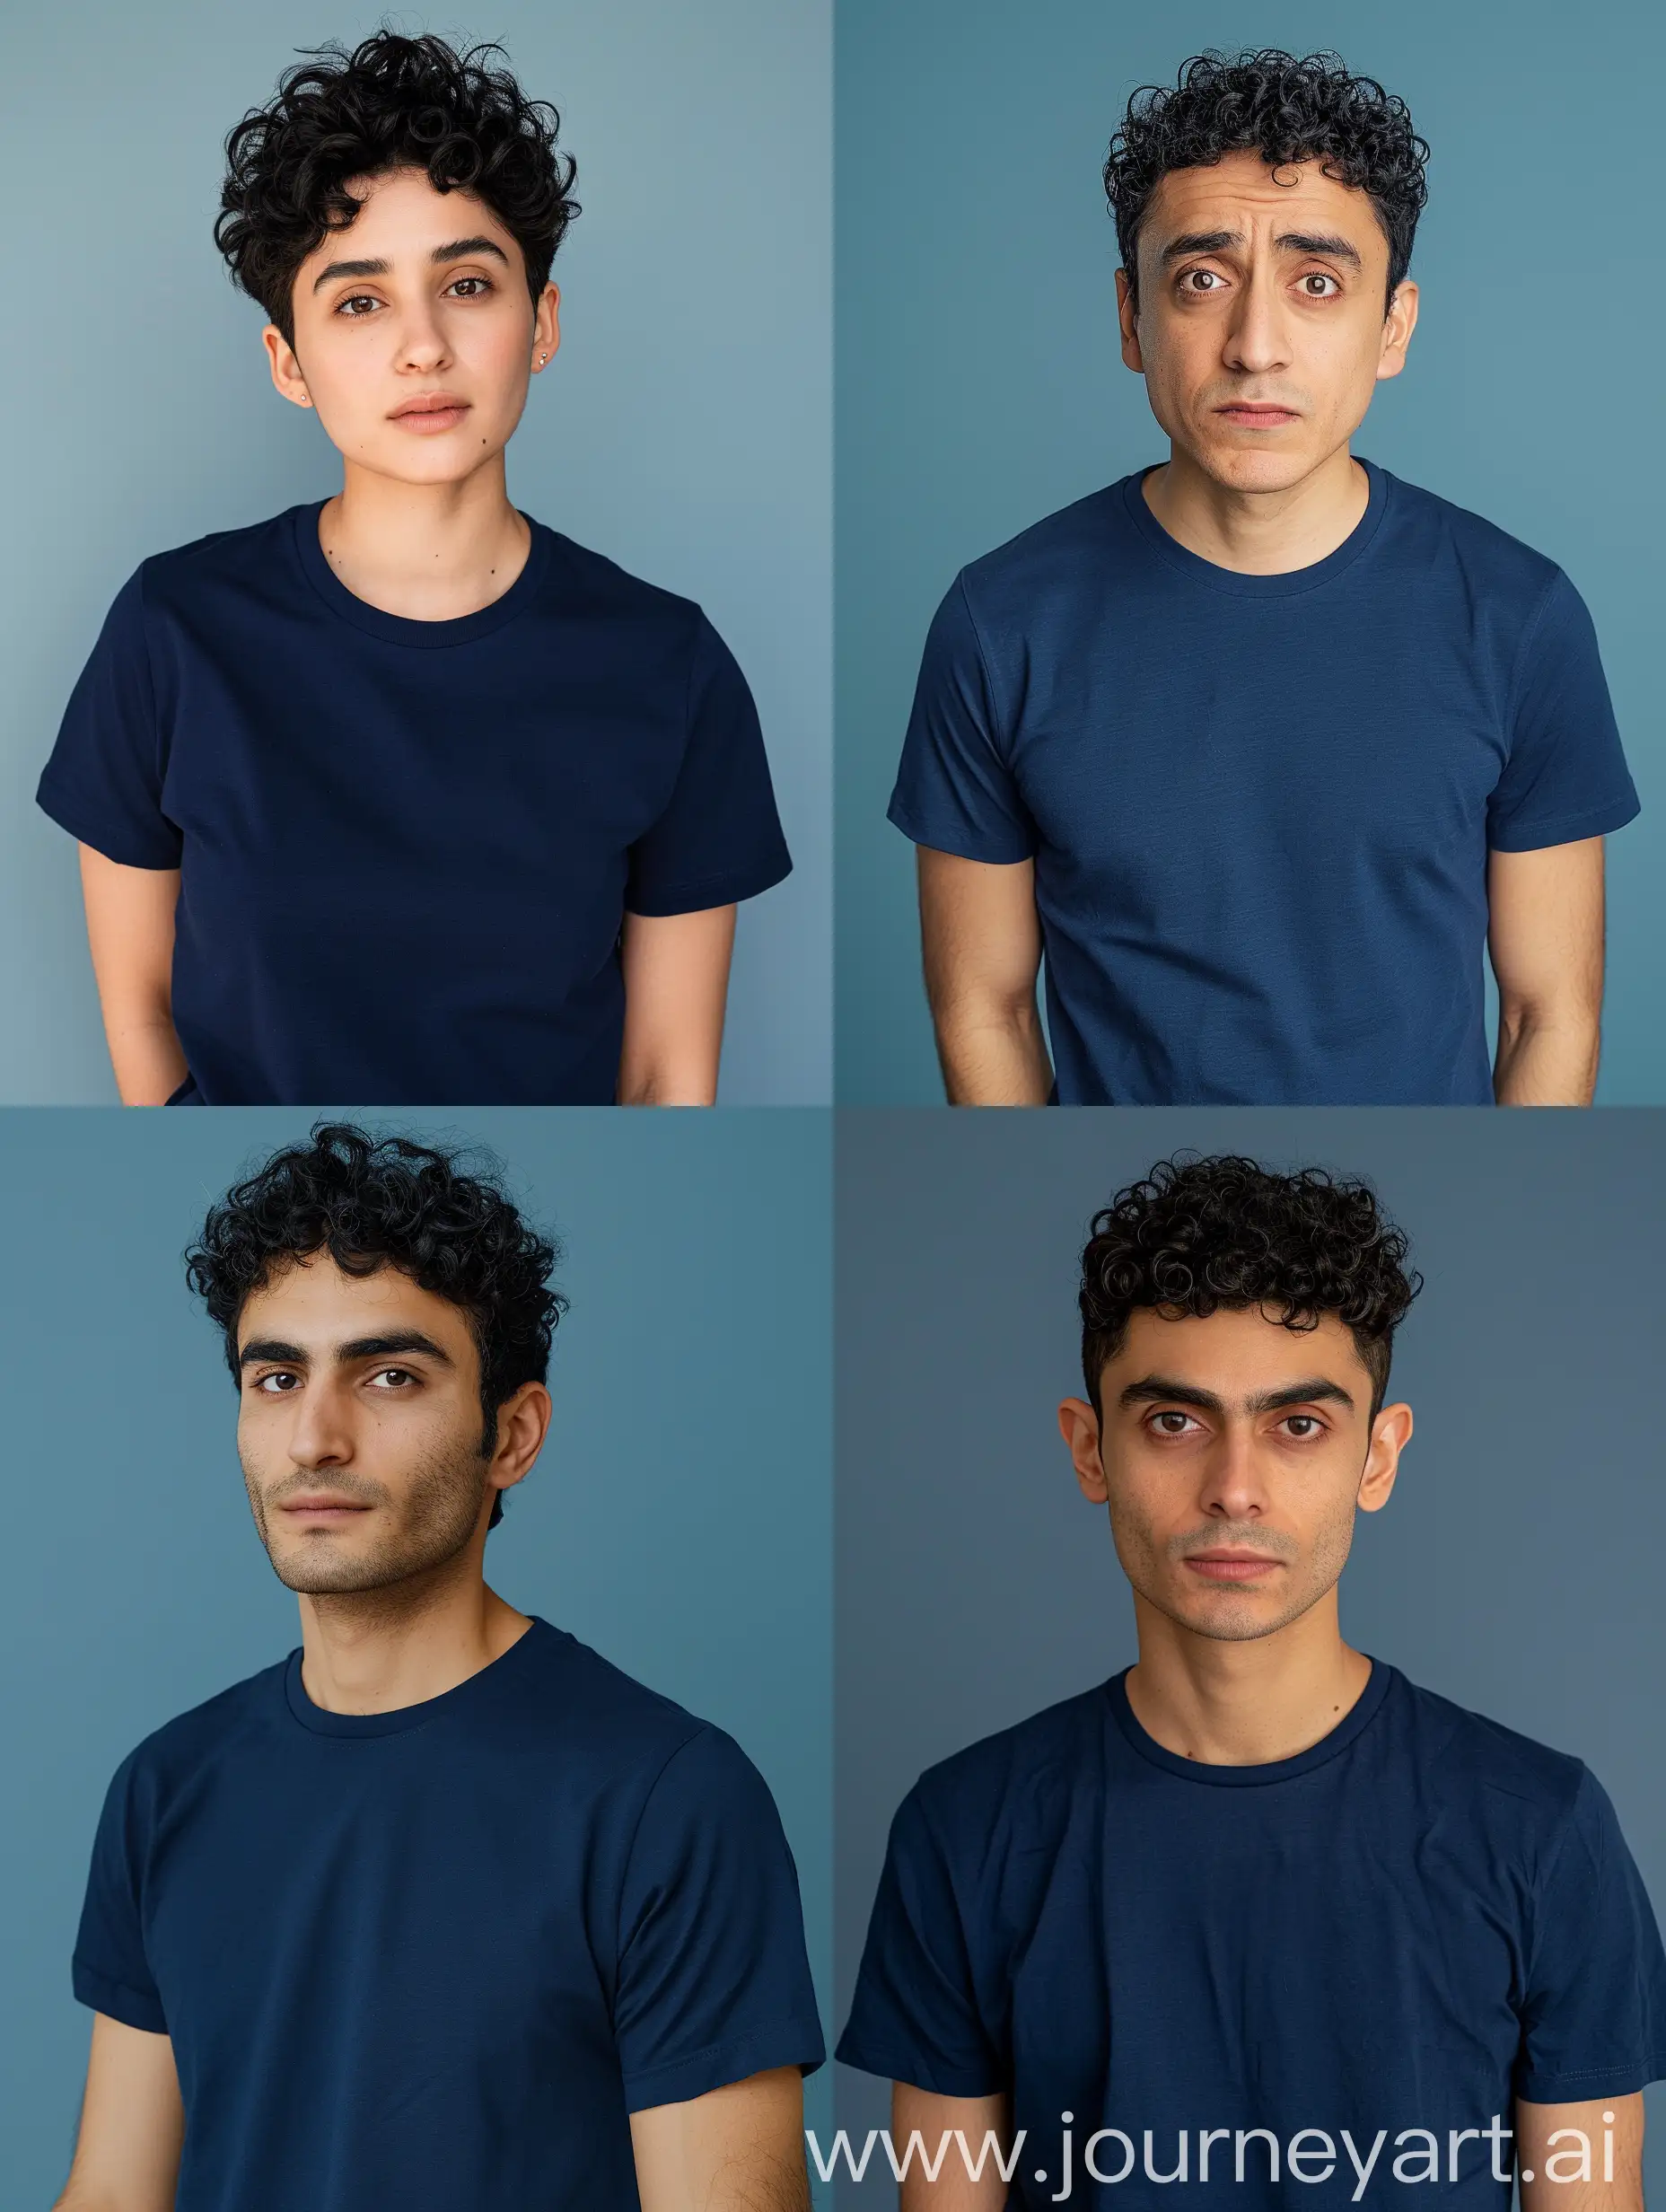 Medium Shot of Navid Mohammadzadeh Looking to the Camera With Short Curly Hair, Navy Blue T-shirt, Middle of the Frame, Simple Navy Blue Background, Adobe Photoshop Software, High Quality --v 6.0 --ar 3:4